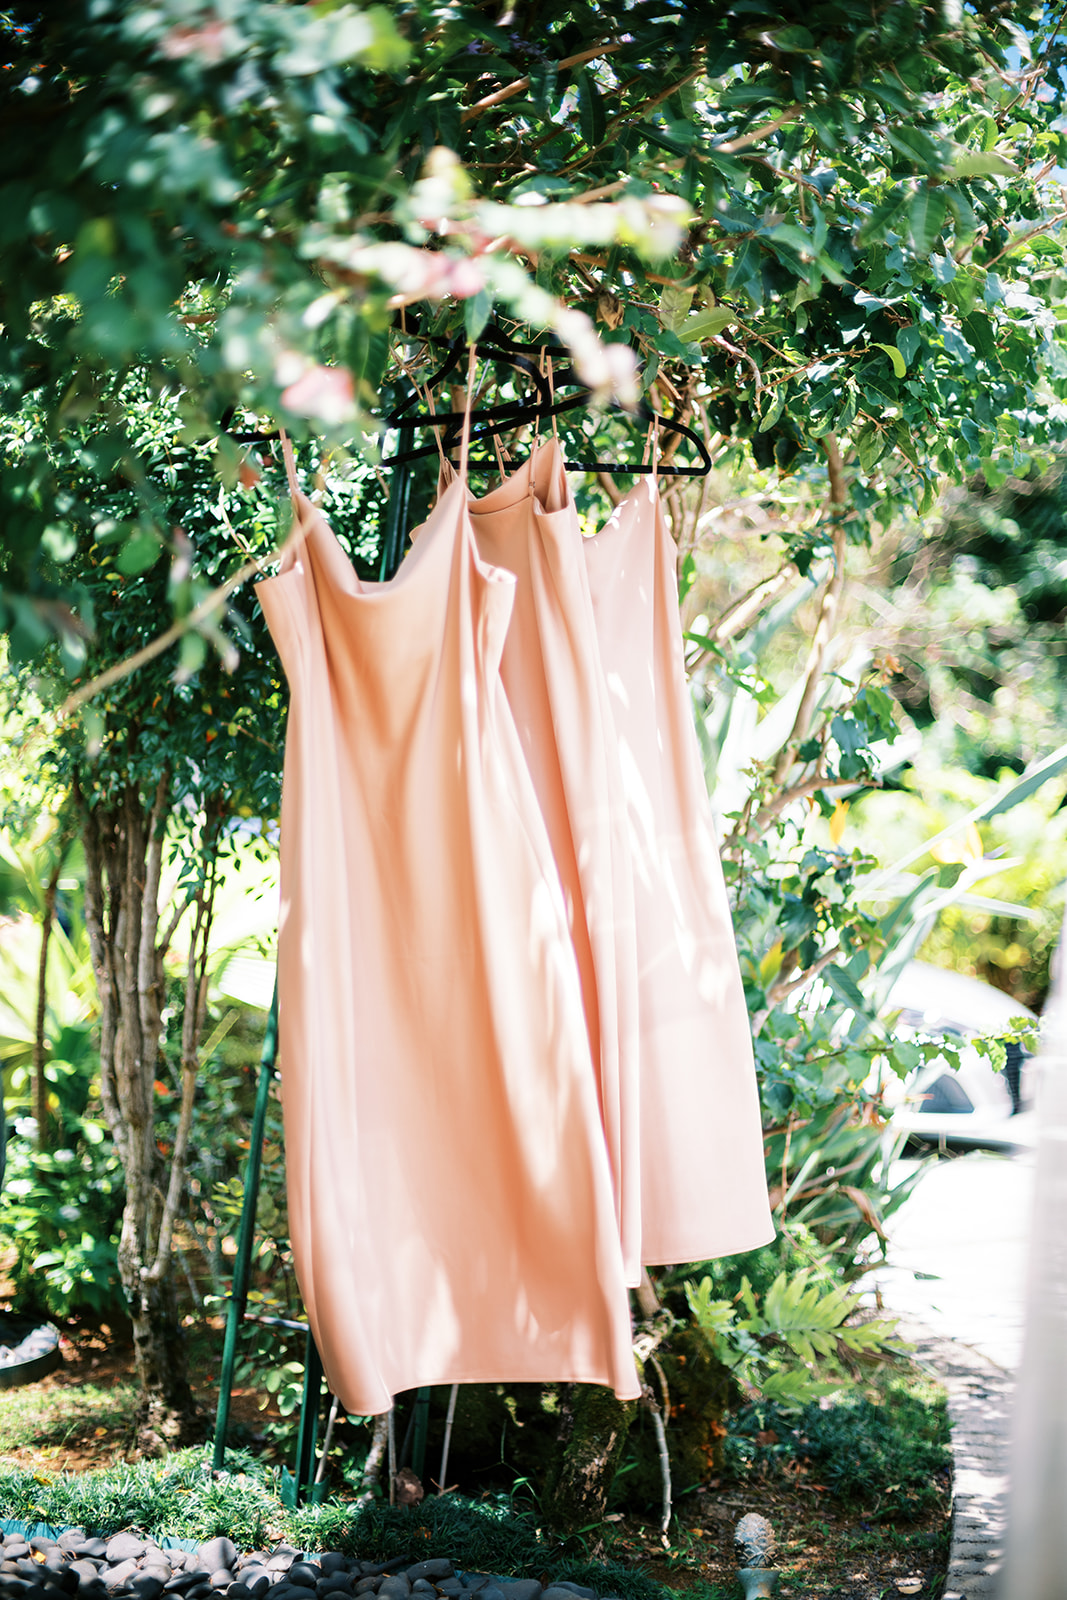 An elegant peach-colored dress hanging from a tree in a garden setting Wedding at Na ‘Āina Kai Botanical Gardens